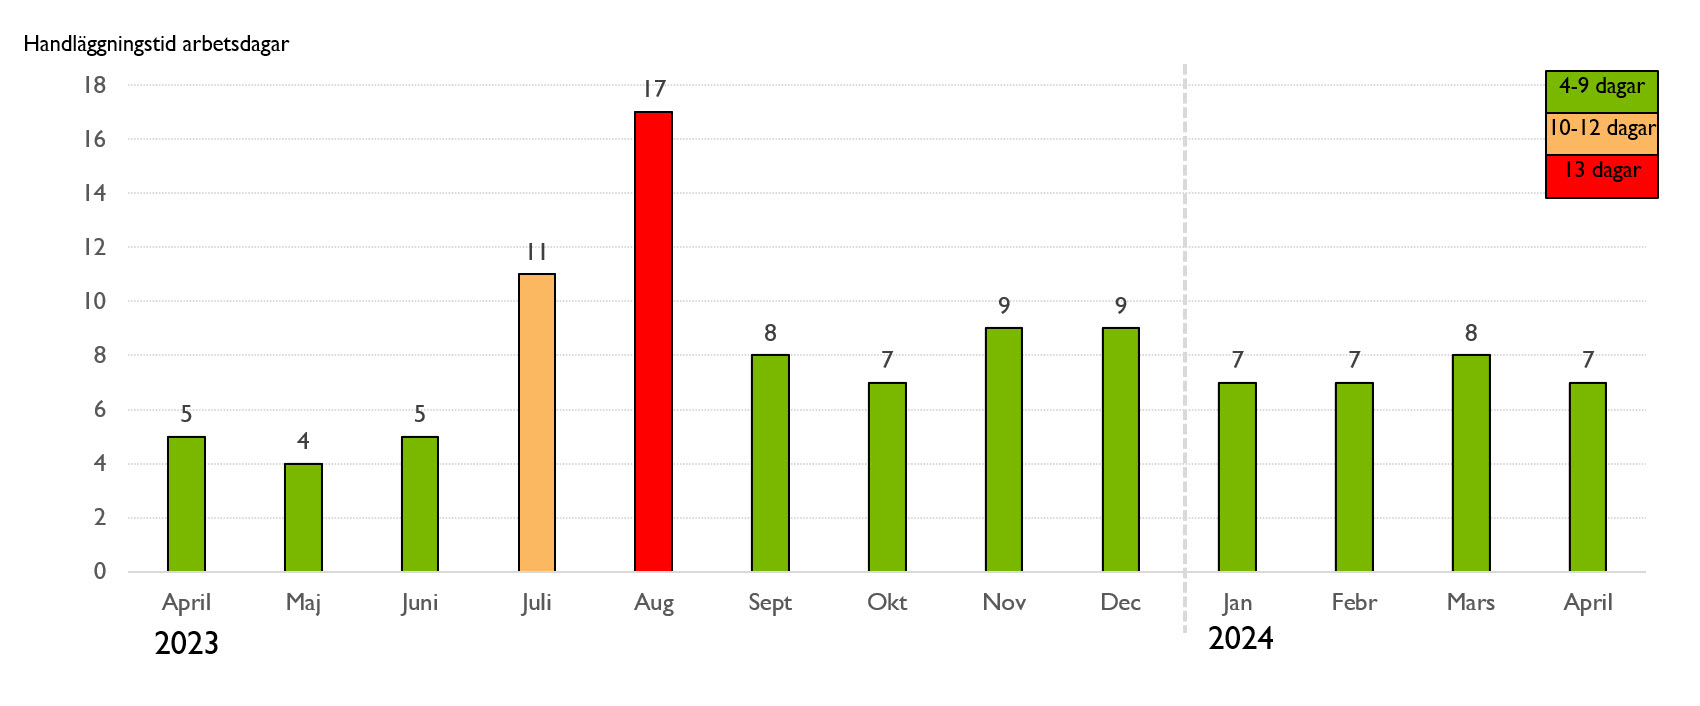 Bar chart showing the months from November 2022 to November 2023. Each month has a bar in red, orange or green. Green means 4-9 days. Orange means 10-12 days. Red means 13 days. The following colors are set for the months in 2022: November is orange. December is green. The following colors are set for the months of 2023: January, February, March, April, May, June are green. July is orange. August is red. September, October and November are green.